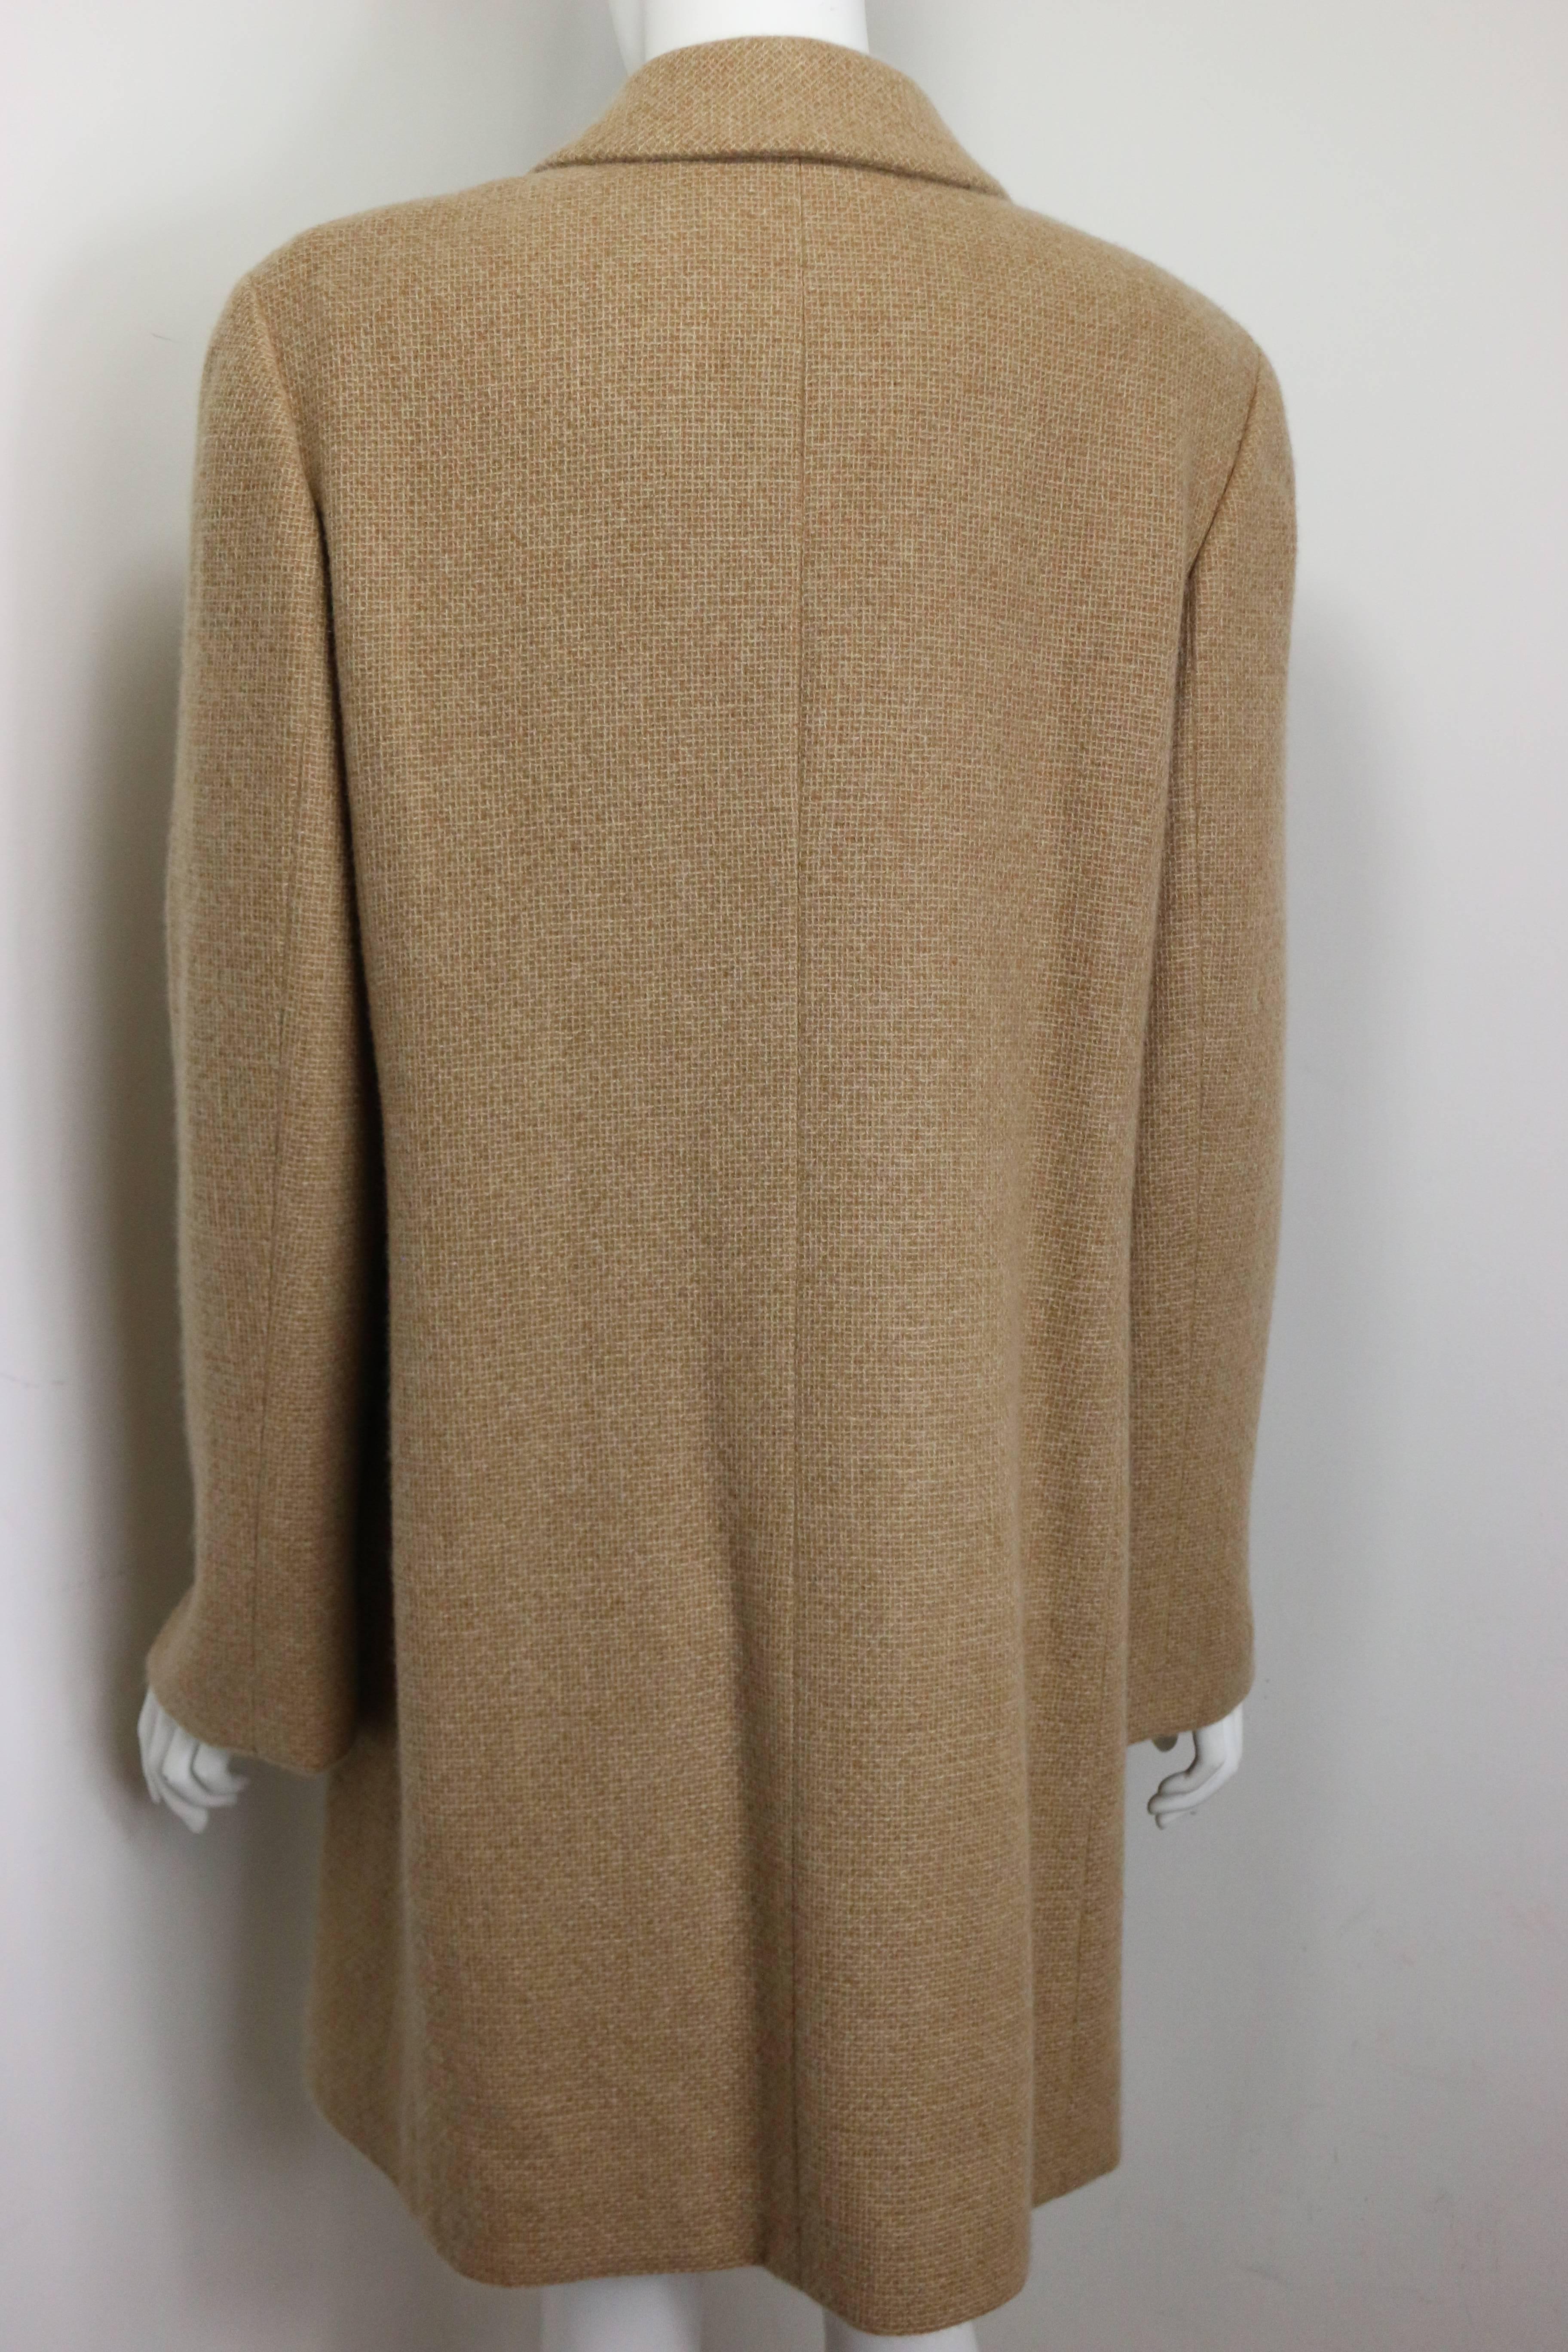 - Chanel camel cashmere long coat from Fall 2000 collection. This chic and pretty cashmere long coat is a truly collectable item!

- Featuring 